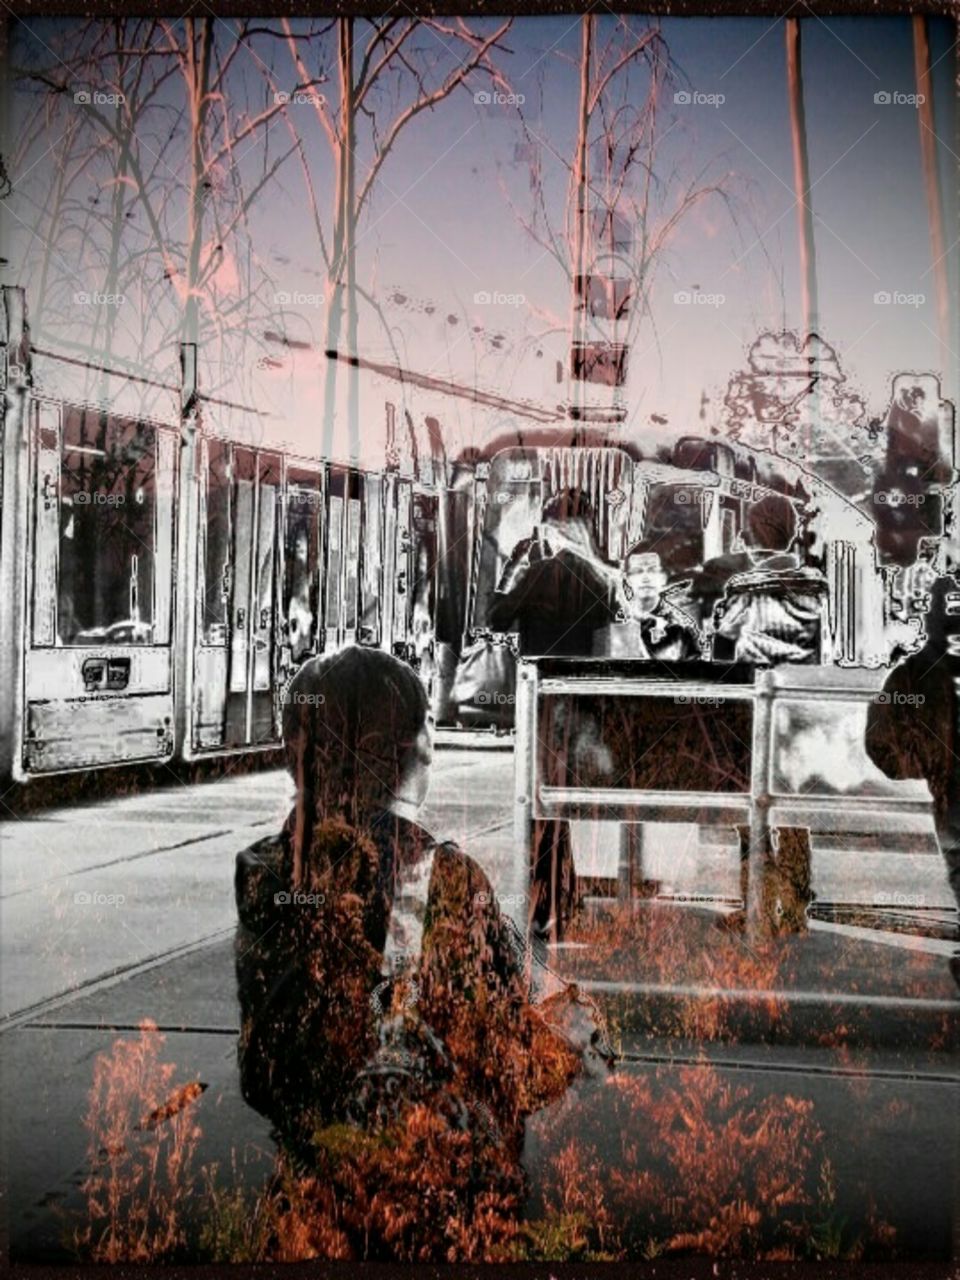 people watching 2. people watching a tram crash mixed with a photo of nature